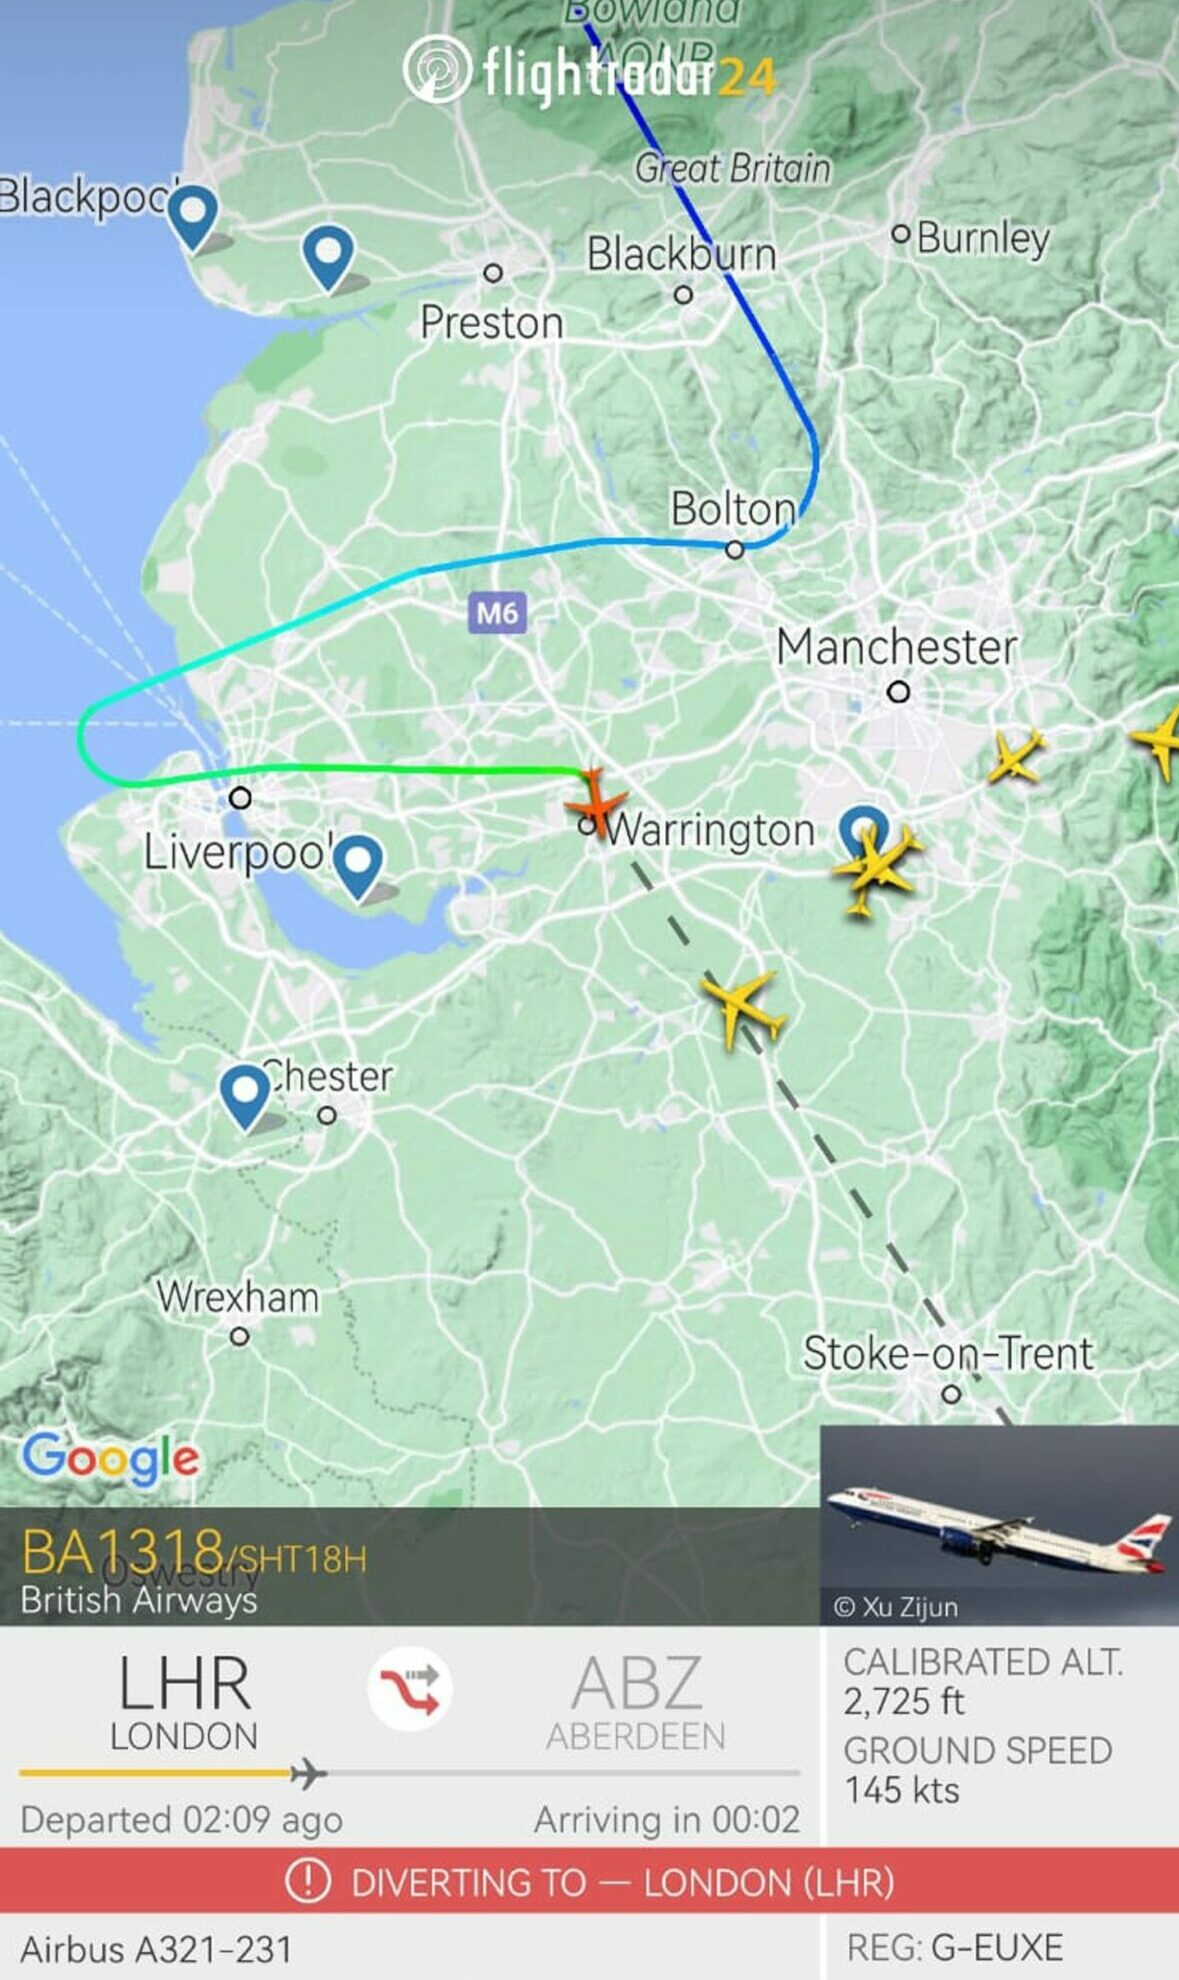 A screenshot of flight BA1318, British Airways London Heathrow to Aberdeen, being tracked as it diverted to Liverpool.